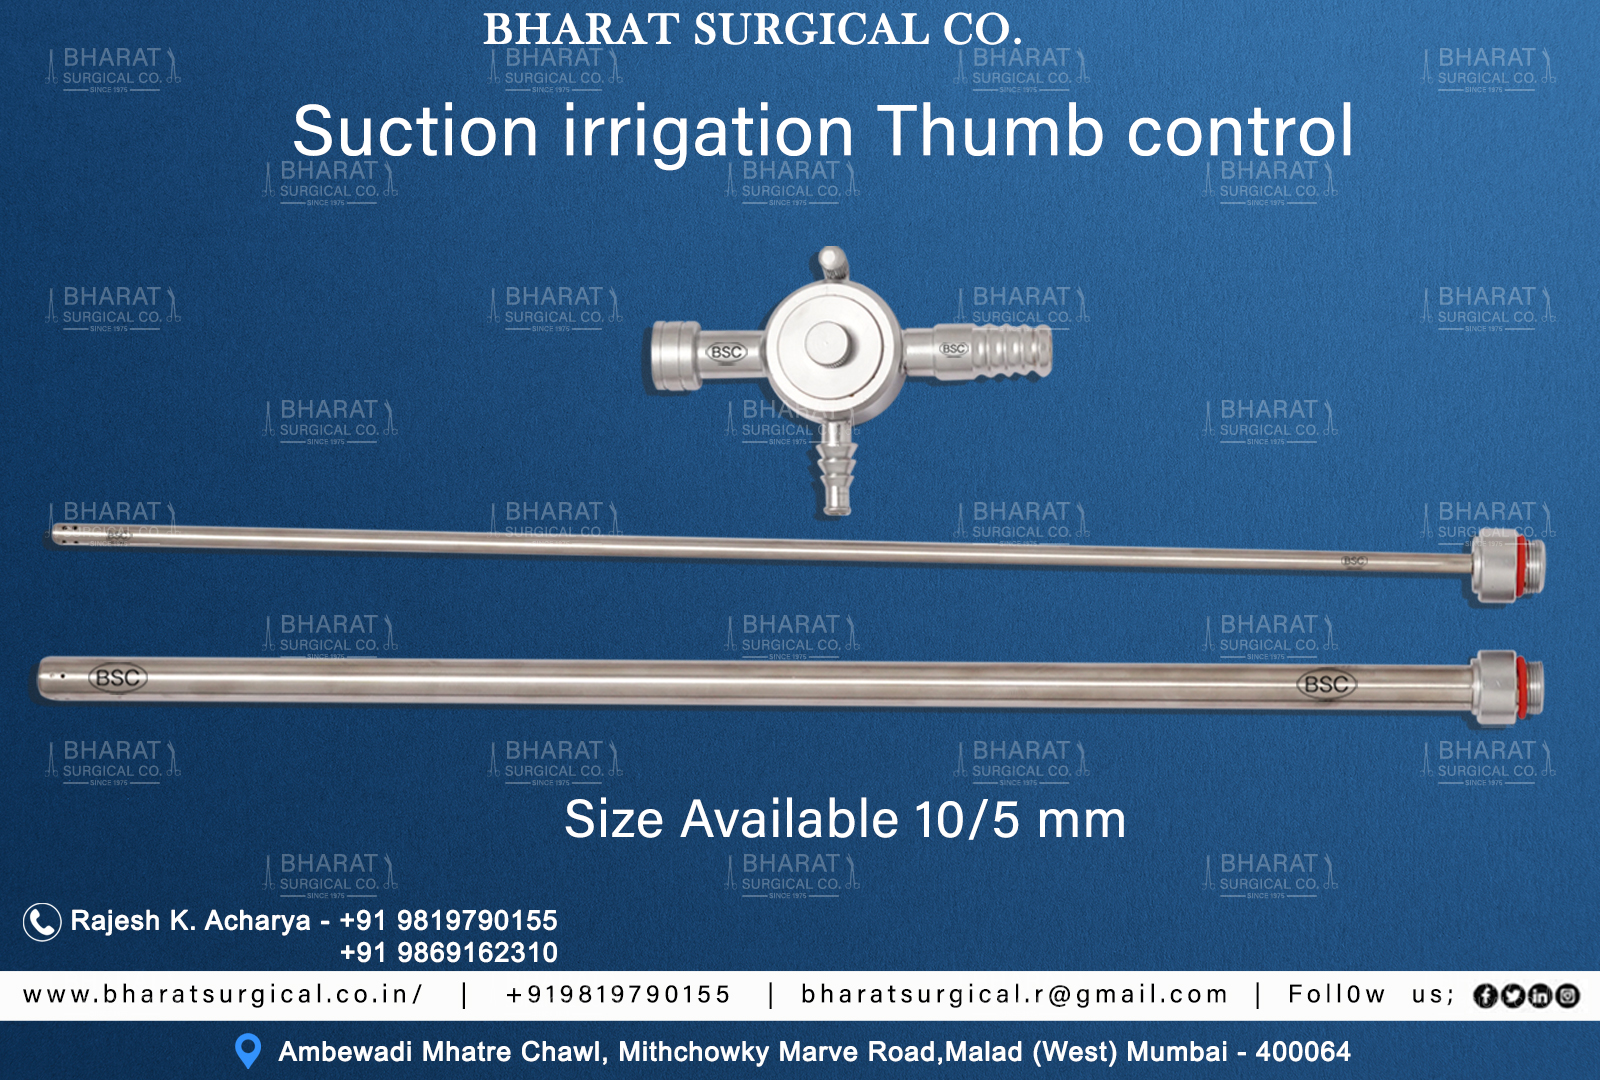 Suction Irrigation Thumb Control manufacturers, suppliers and exporters 